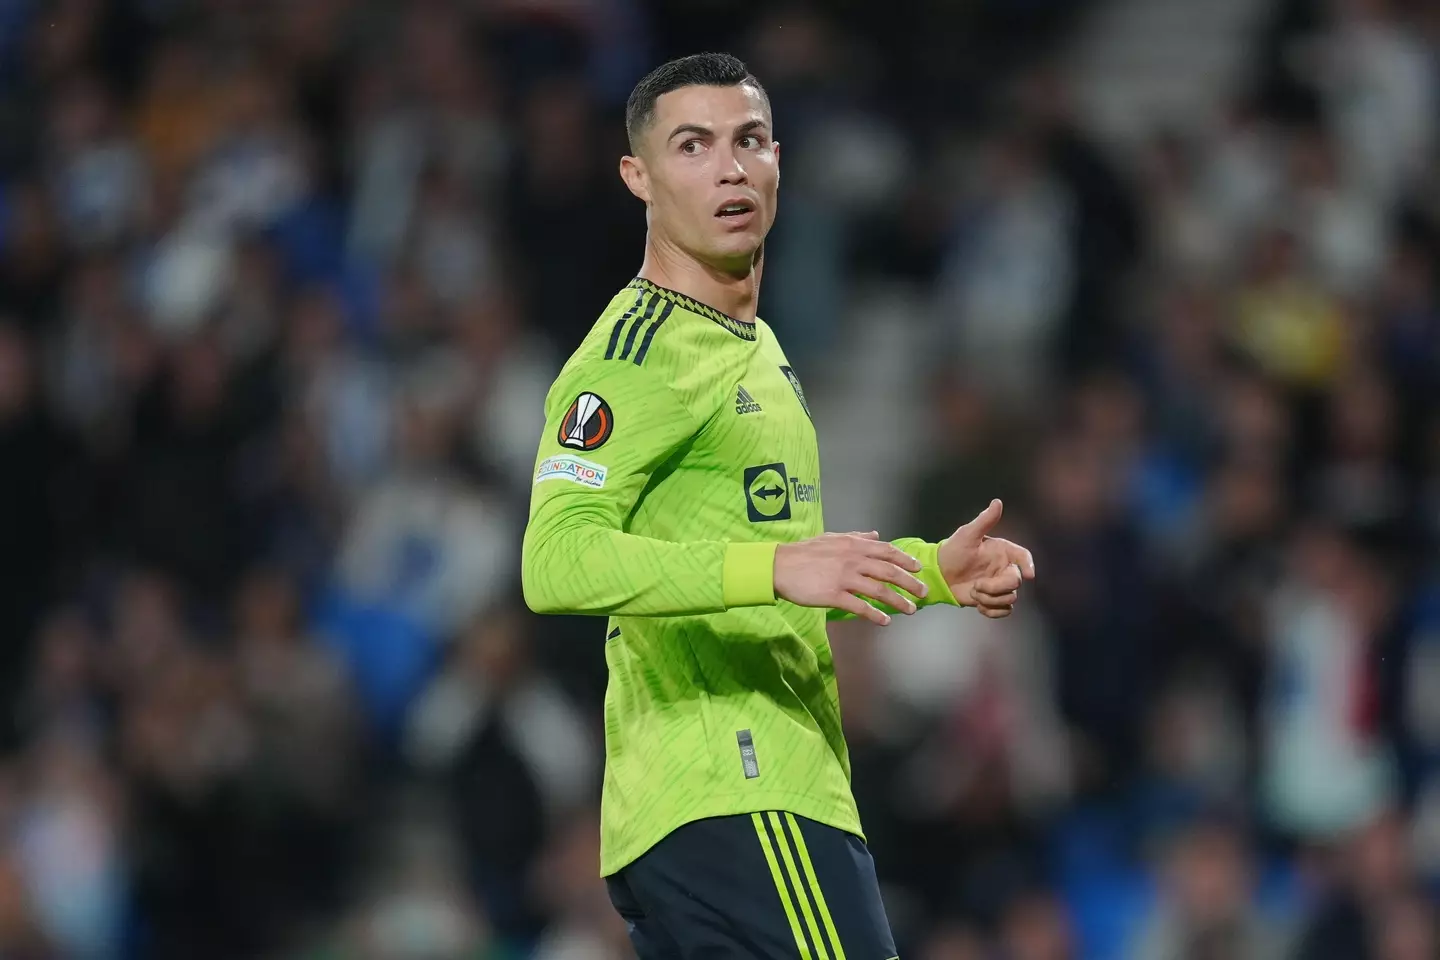 Ronaldo has been strongly criticised by Richard Keys (Image: Alamy)